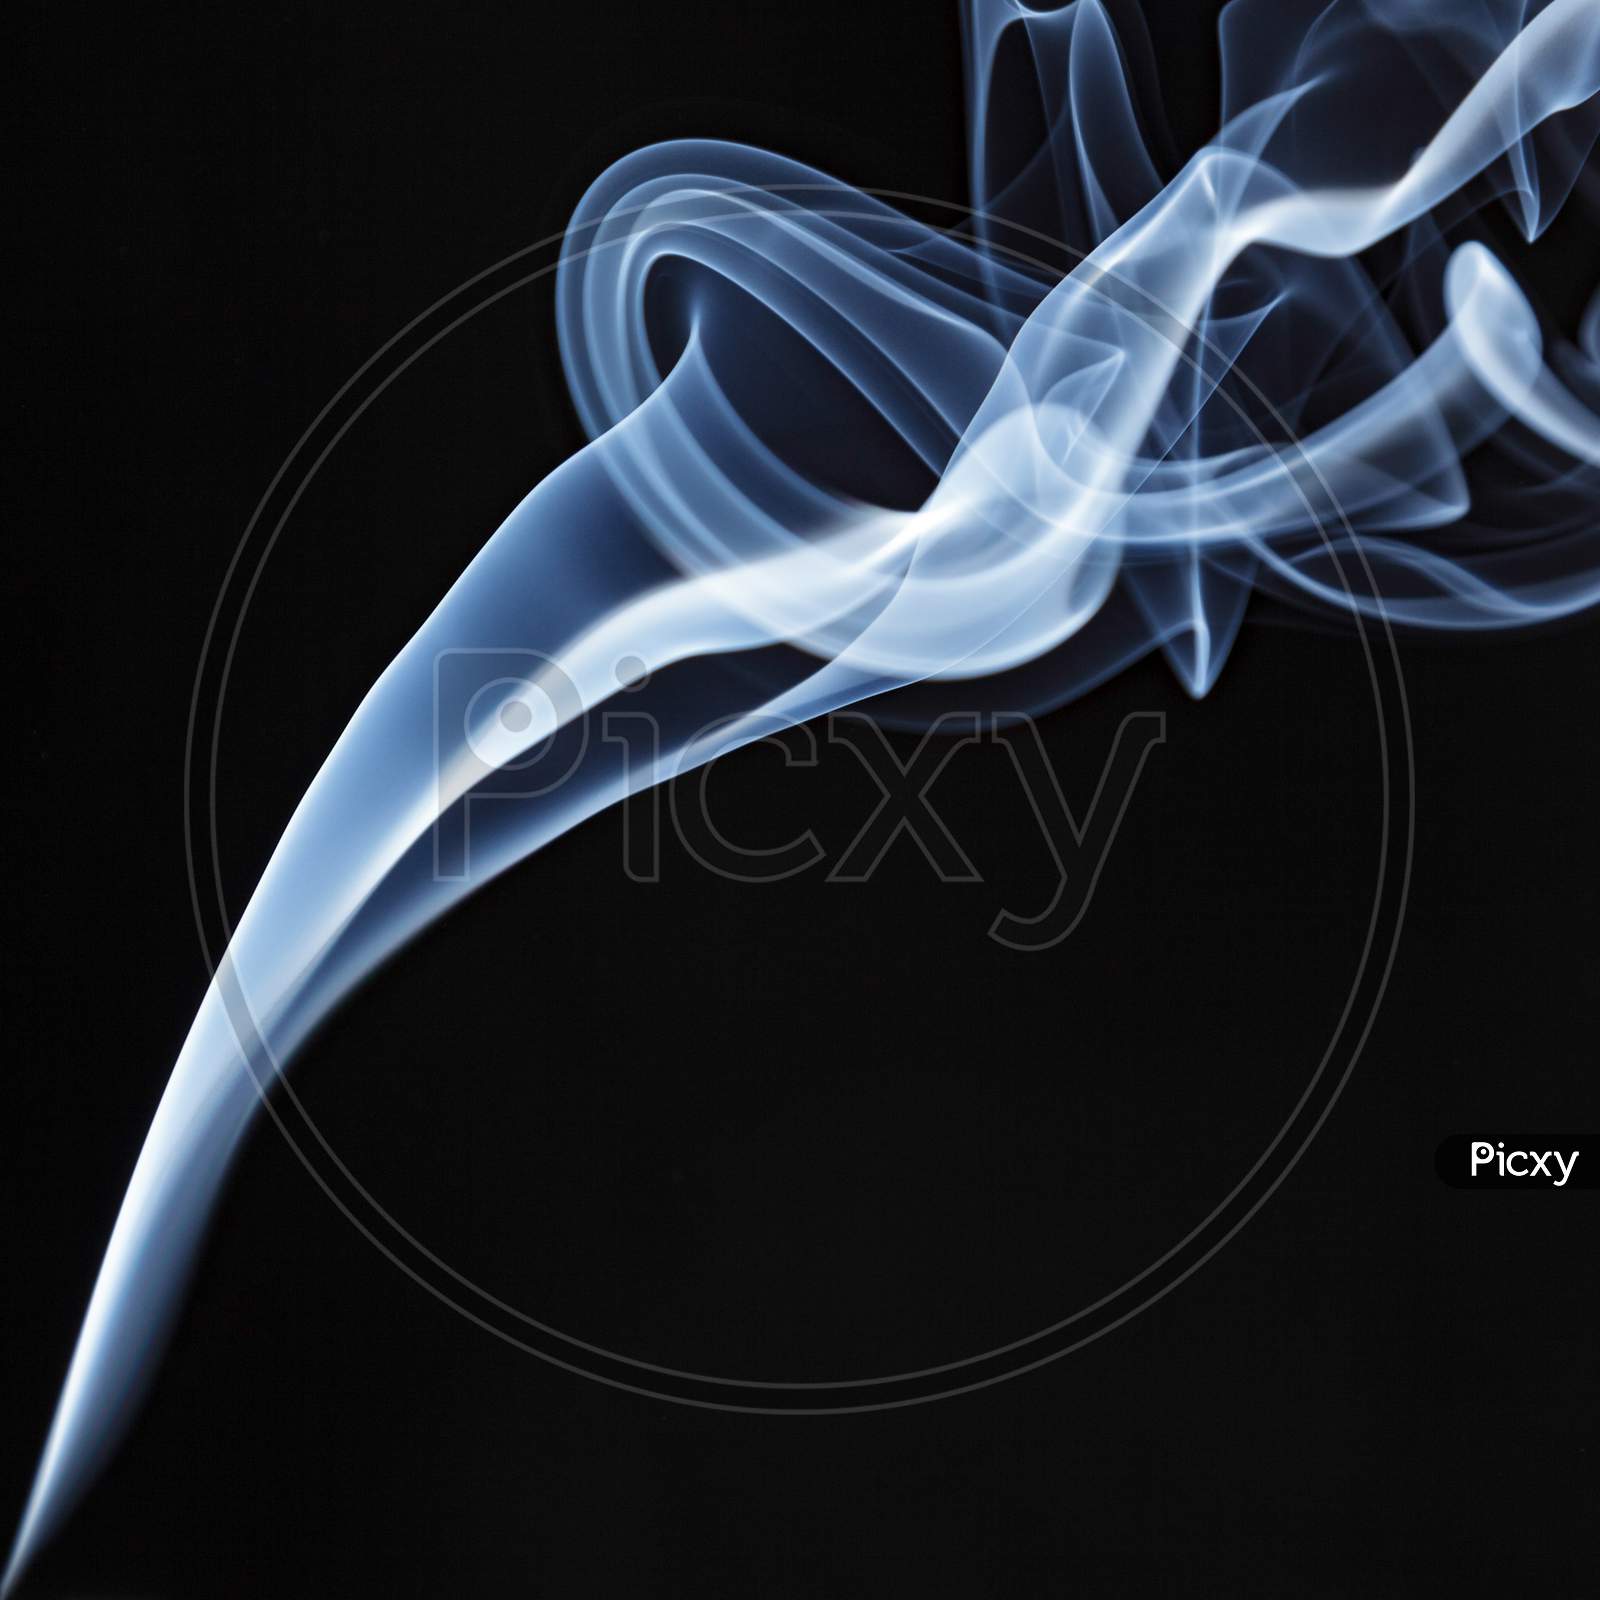 Incense Stick Smoke Trail Against A Black Background